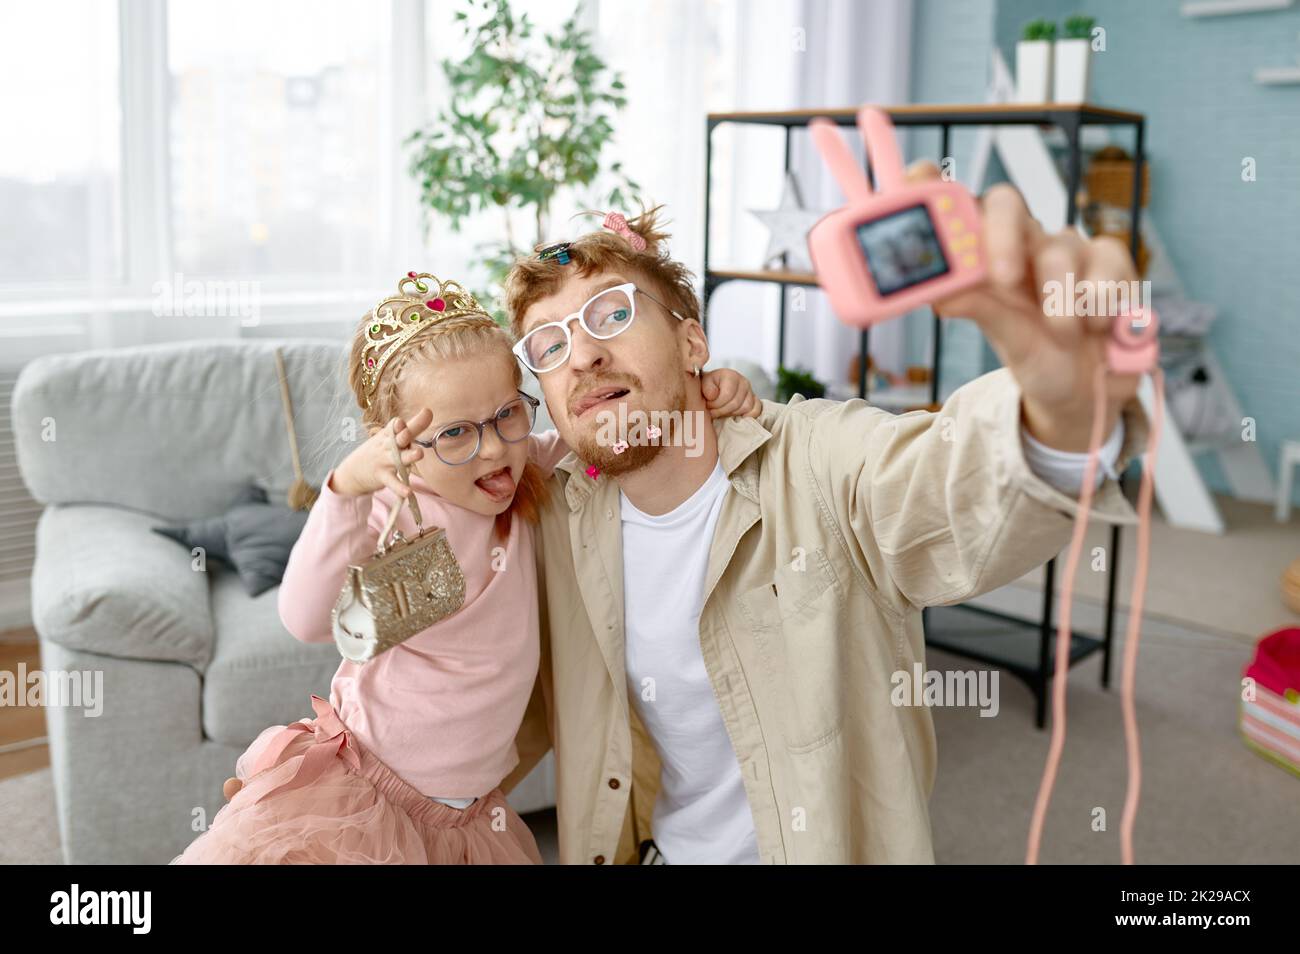 Joyful father and daughter making funny selfie Stock Photo